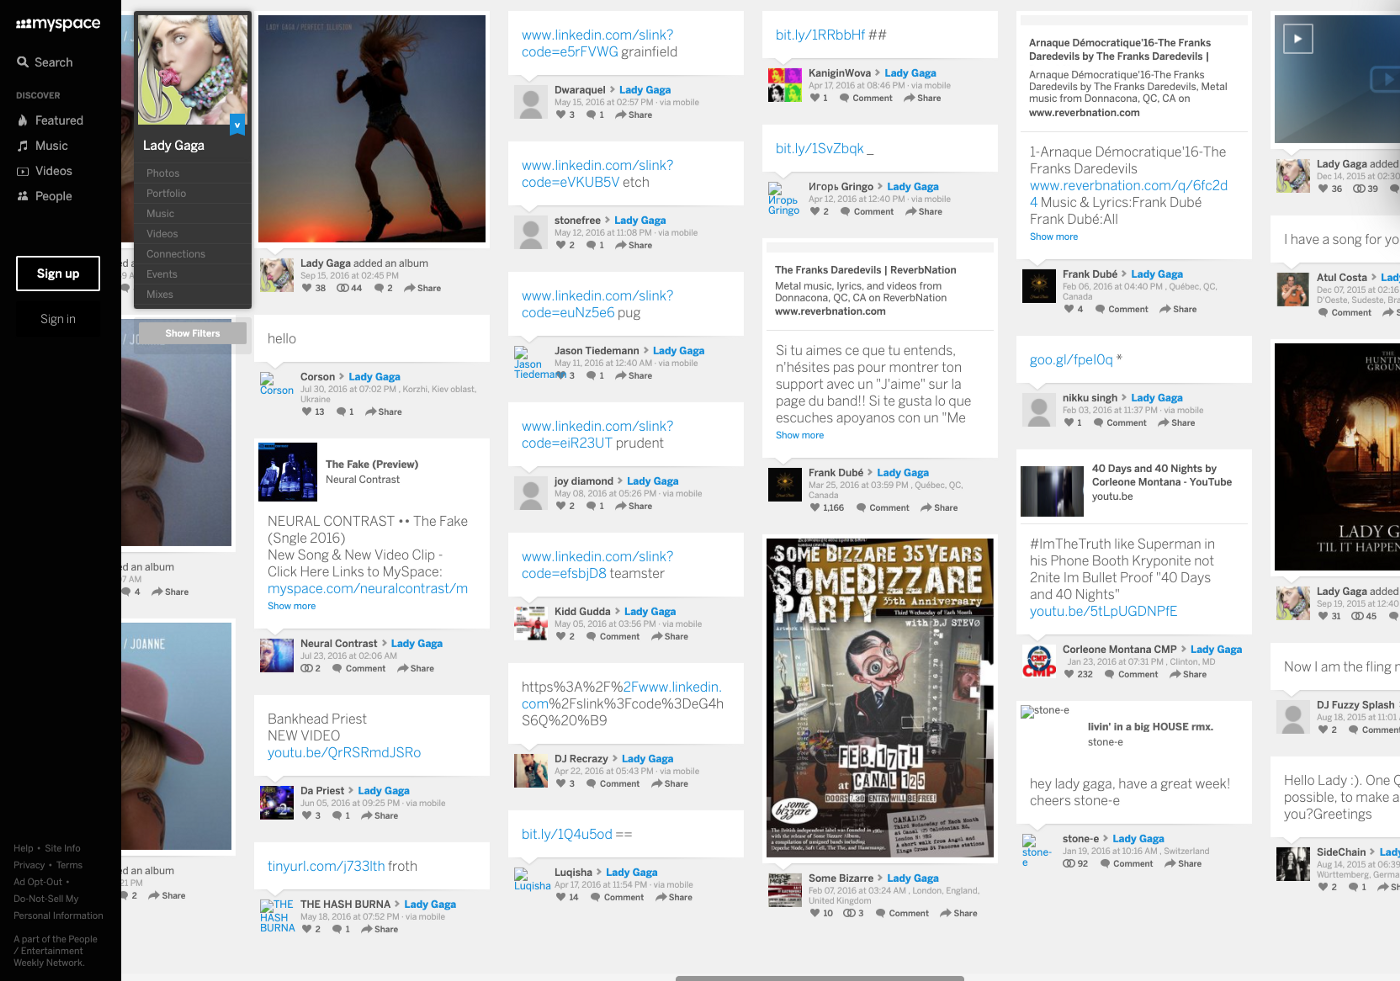 Lady Gaga's MySpace page. Different posts are scattered on the screen with no apparent headings or organization. 